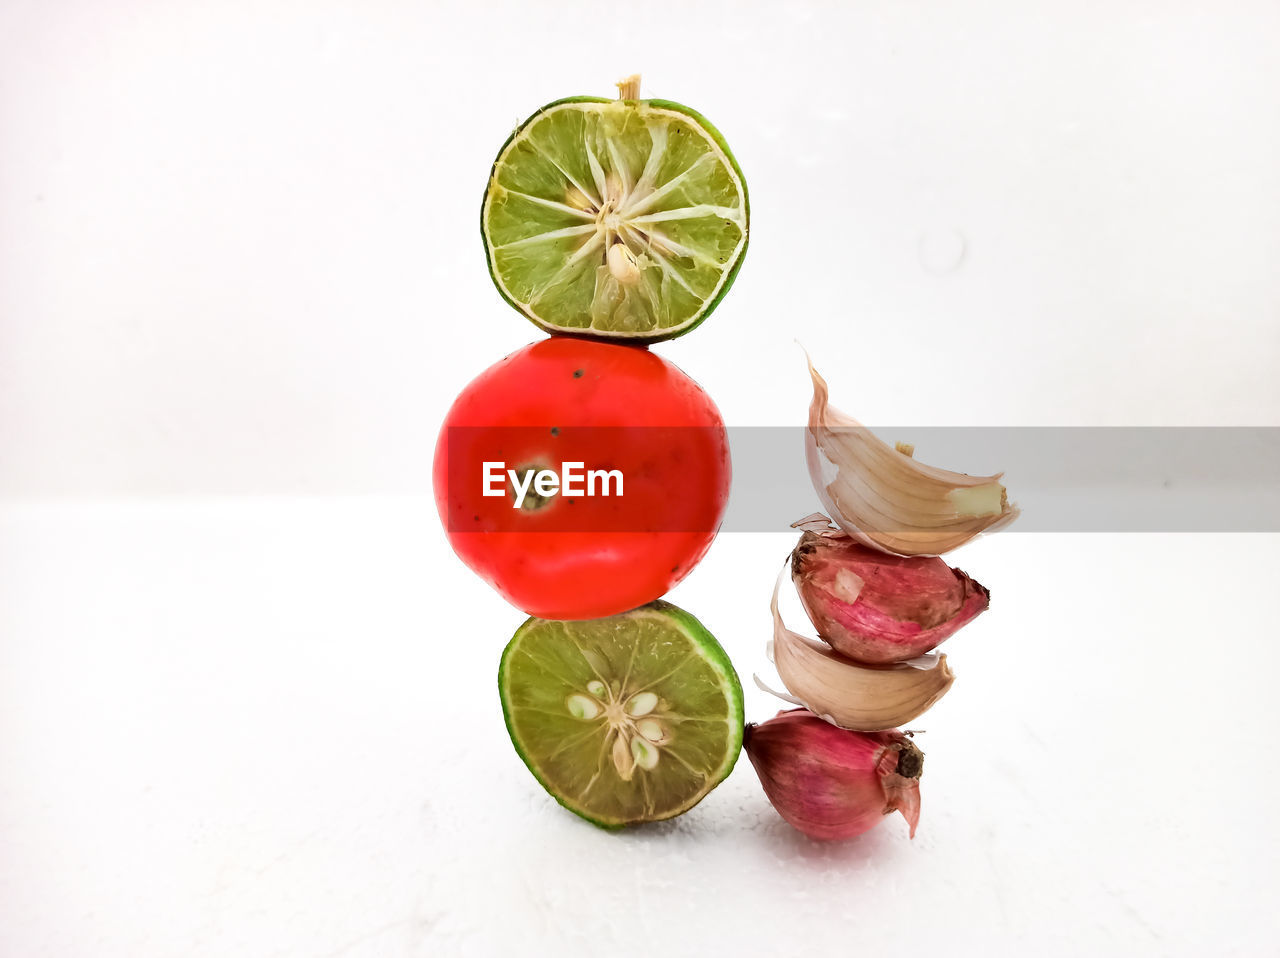 HIGH ANGLE VIEW OF FRUITS ON WHITE BACKGROUND